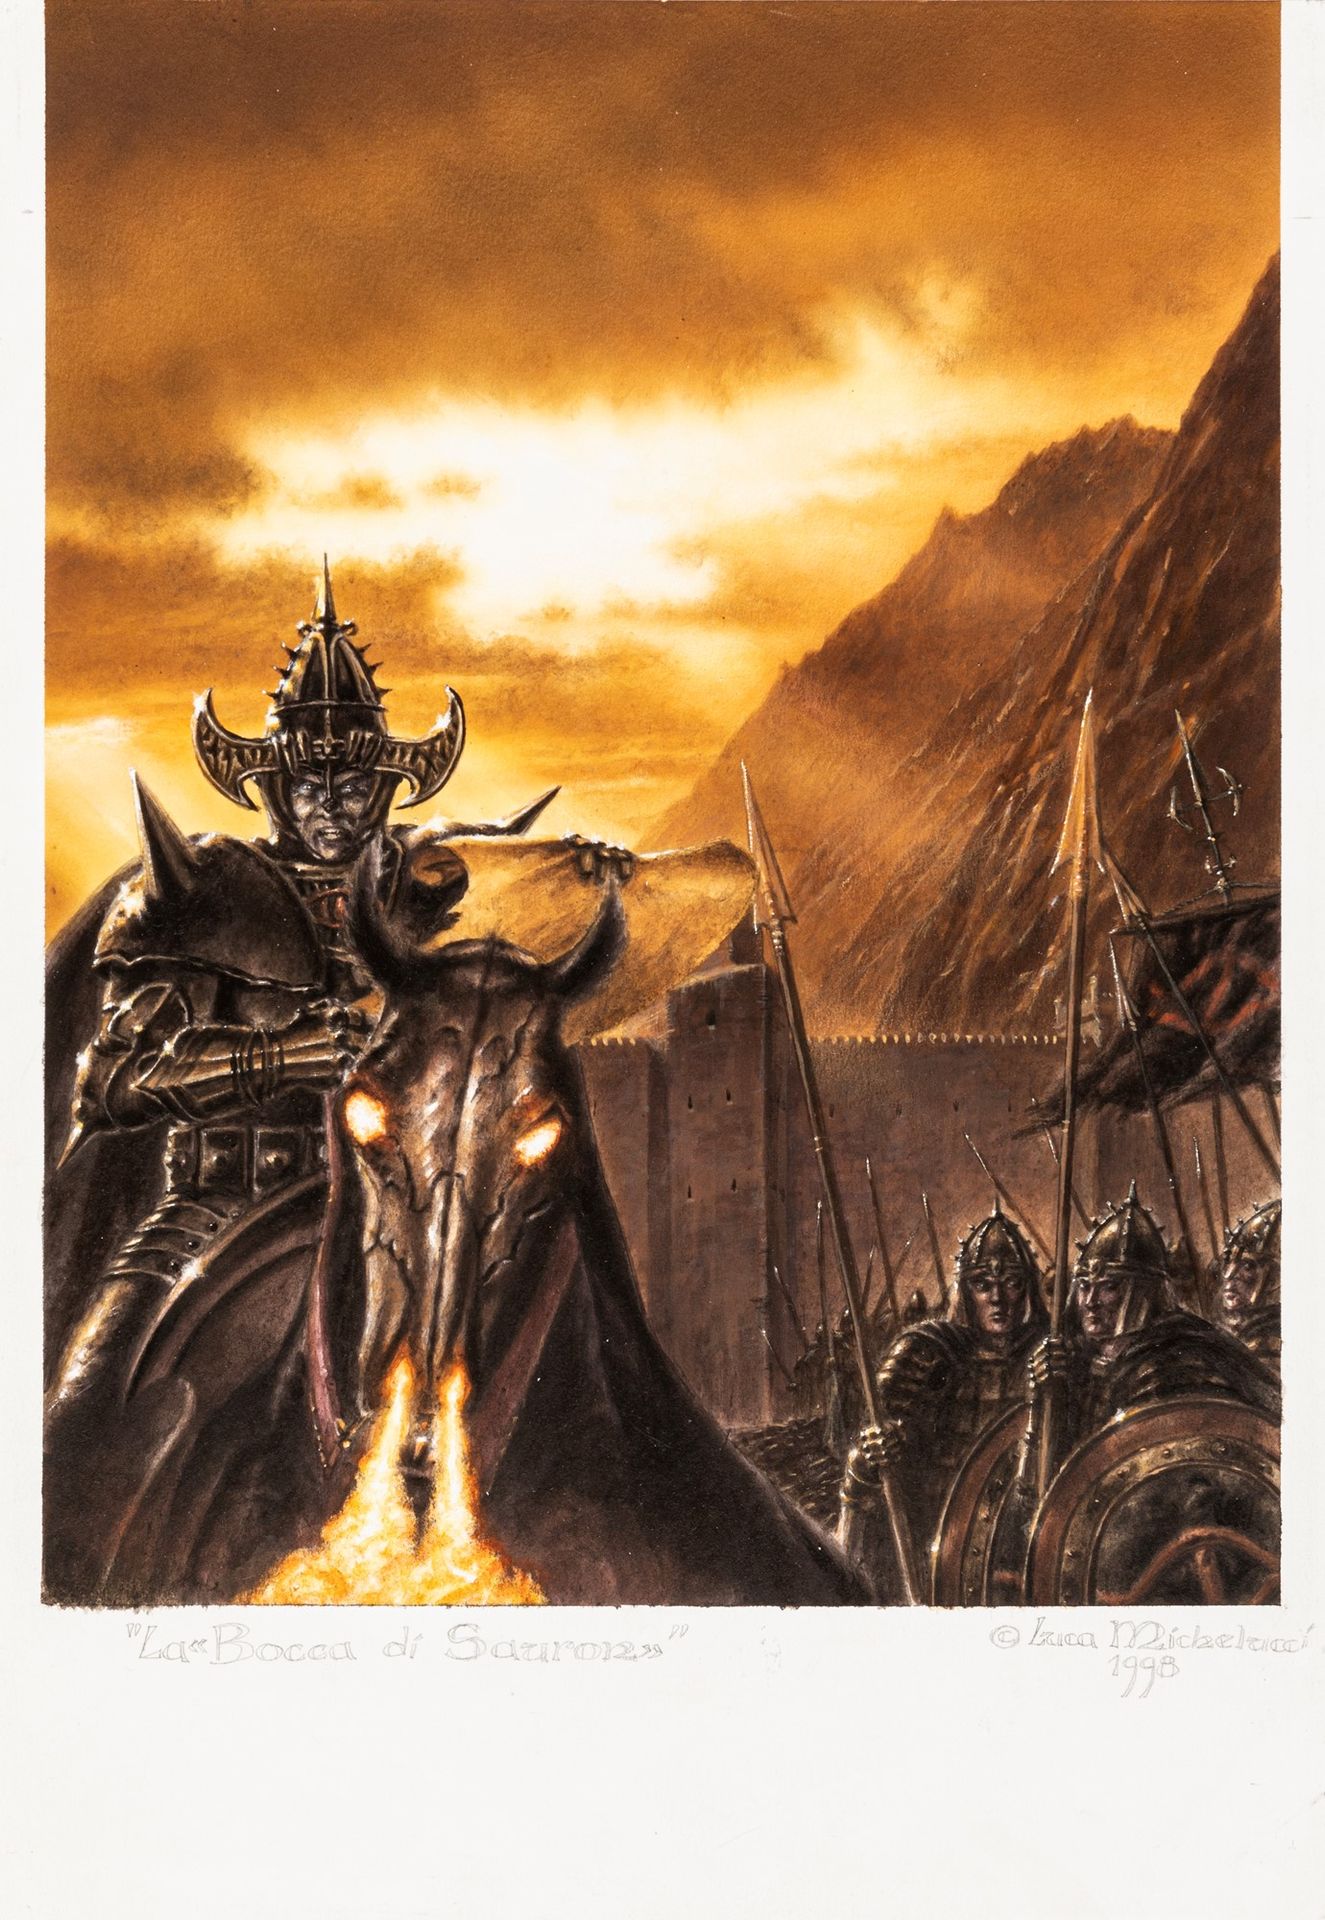 Luca Michelucci The mouth of Sauron, 1998

acrylics and airbrush on thin cardboa&hellip;